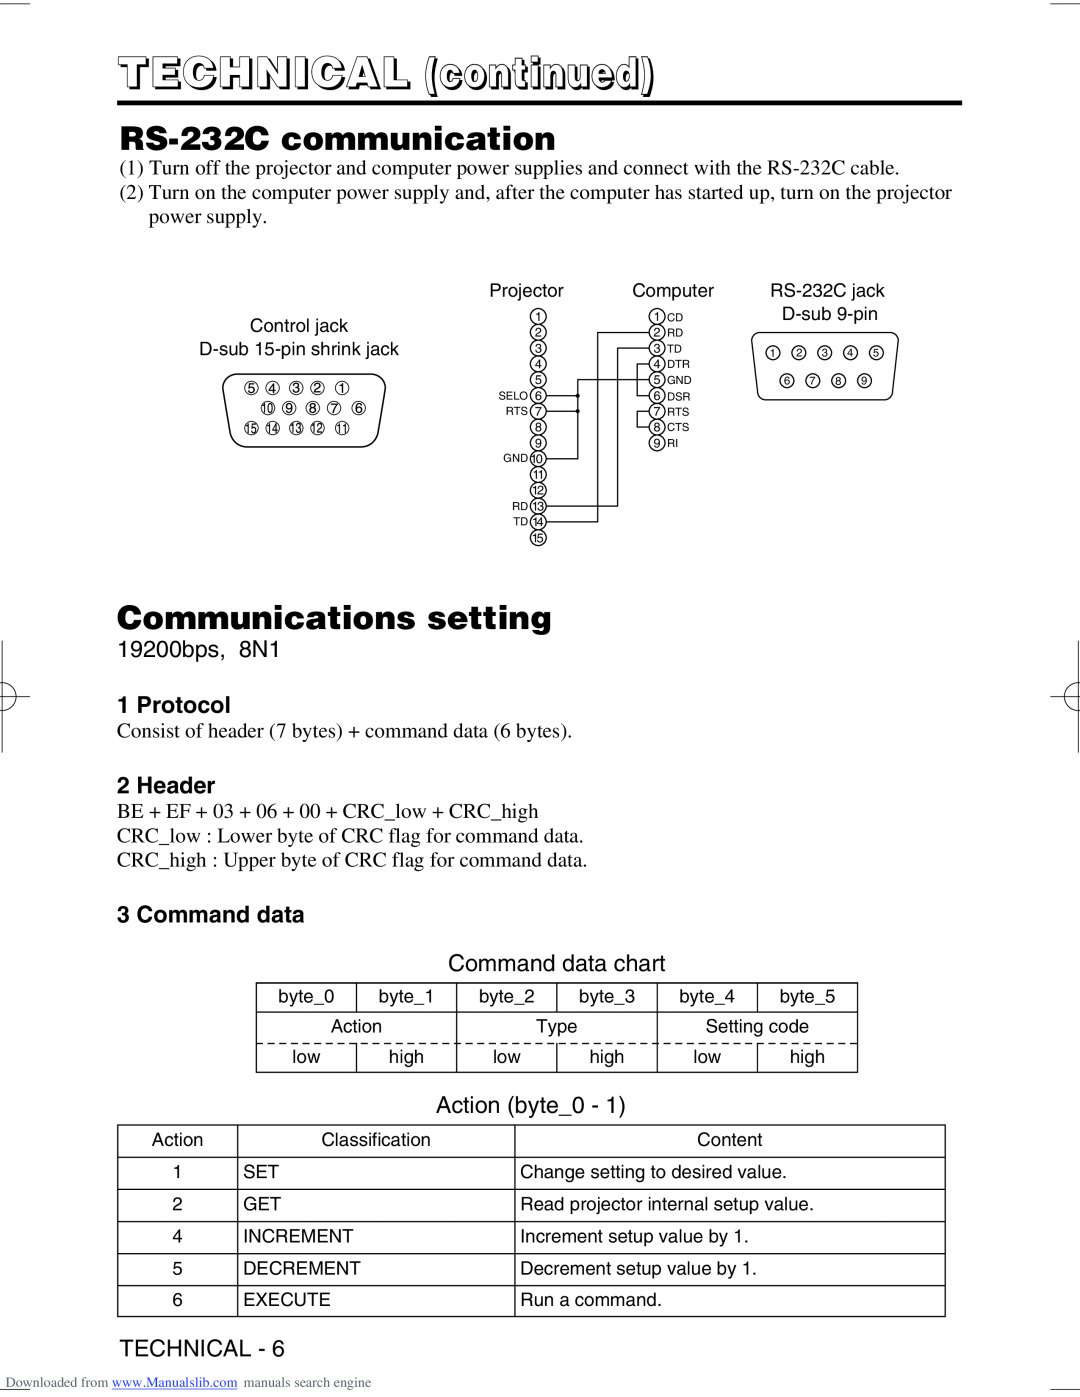 Hitachi CP-X995W RS-232C communication, Communications setting, Protocol, Header, Command data, TECHNICAL continued 